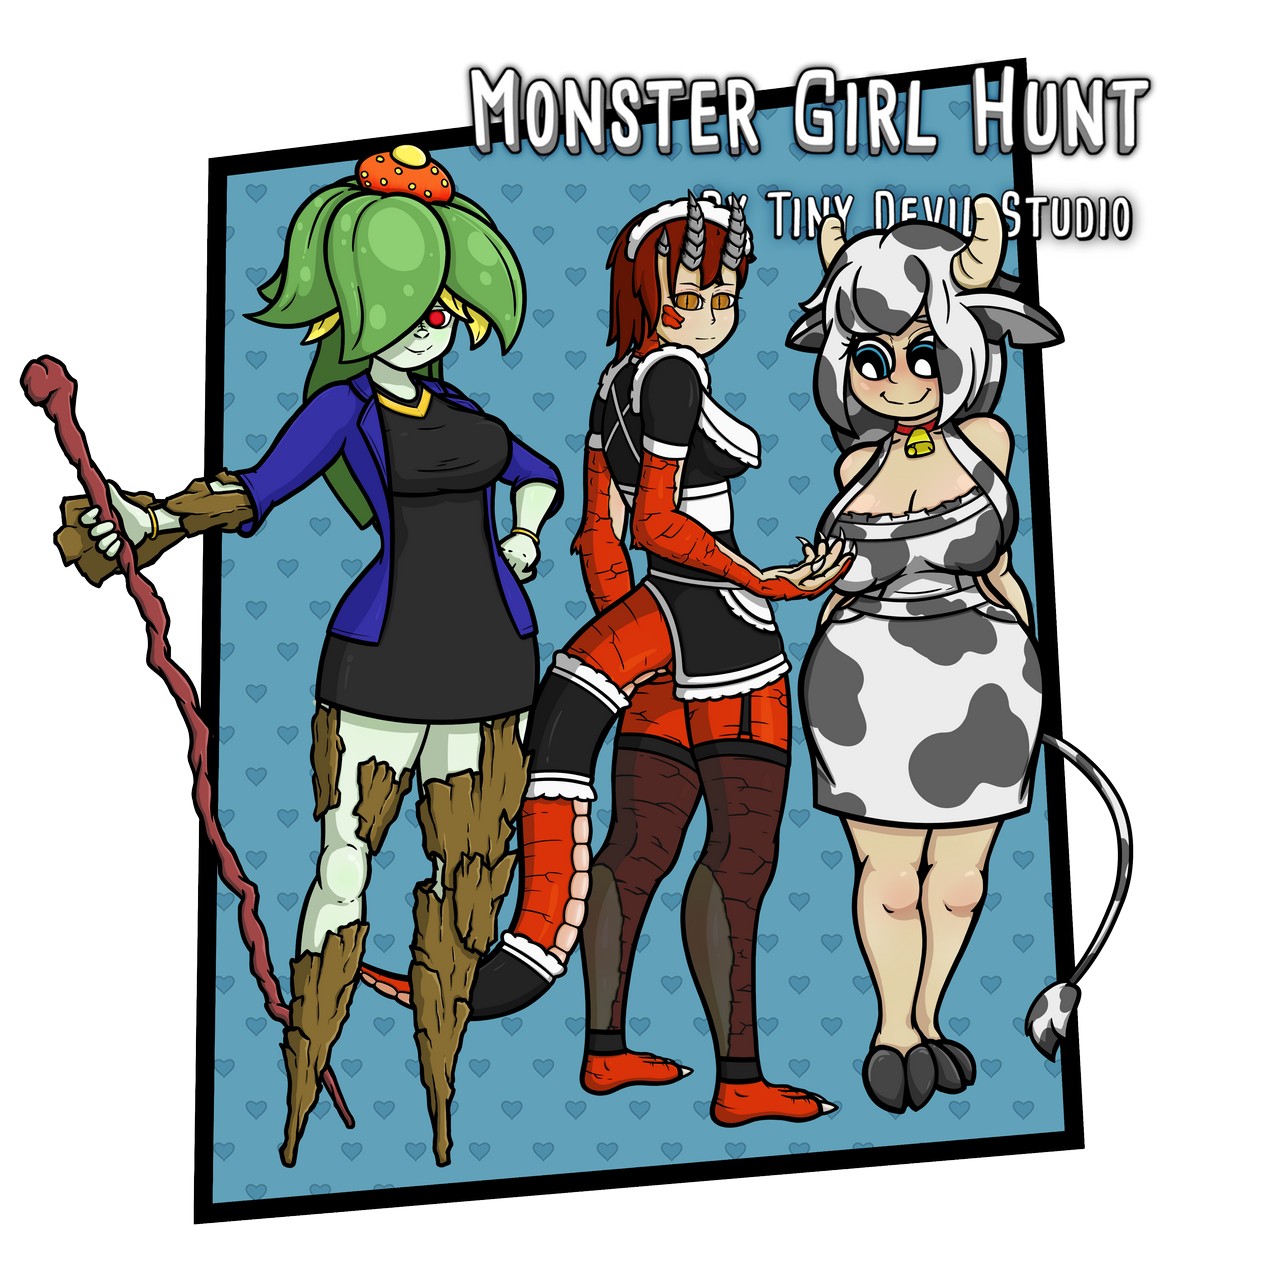 Monster Girl Hunt 0 2 45 Out To The Public Link In The Comment